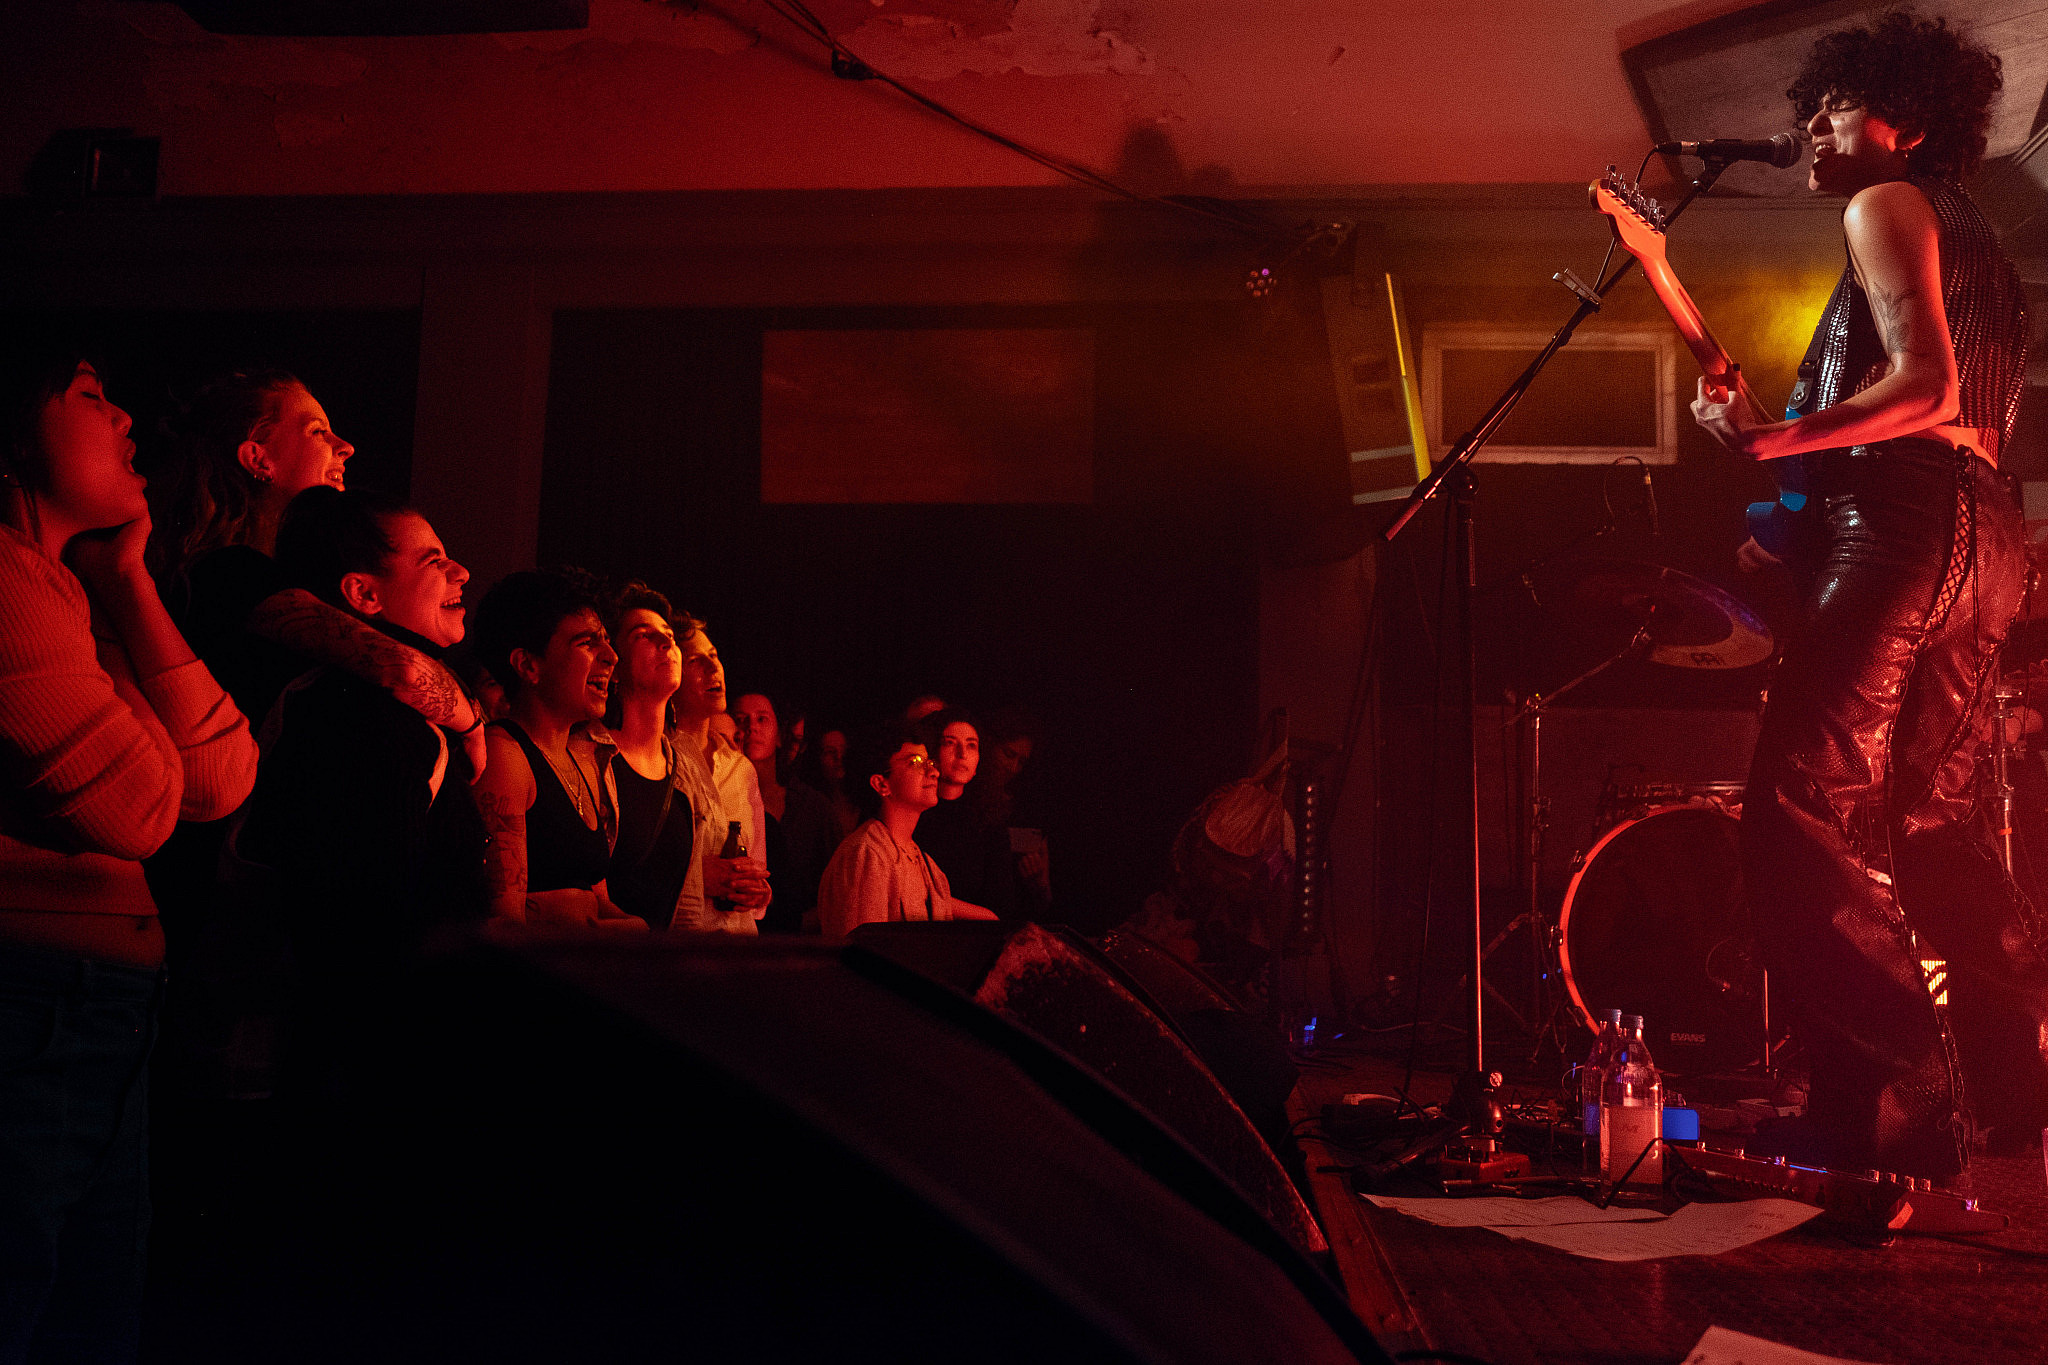 Rasha Nahas performing in a show for her new album 'Amrat' at Kantine am Berghain, Berlin, January 2023. (Laura Müller)